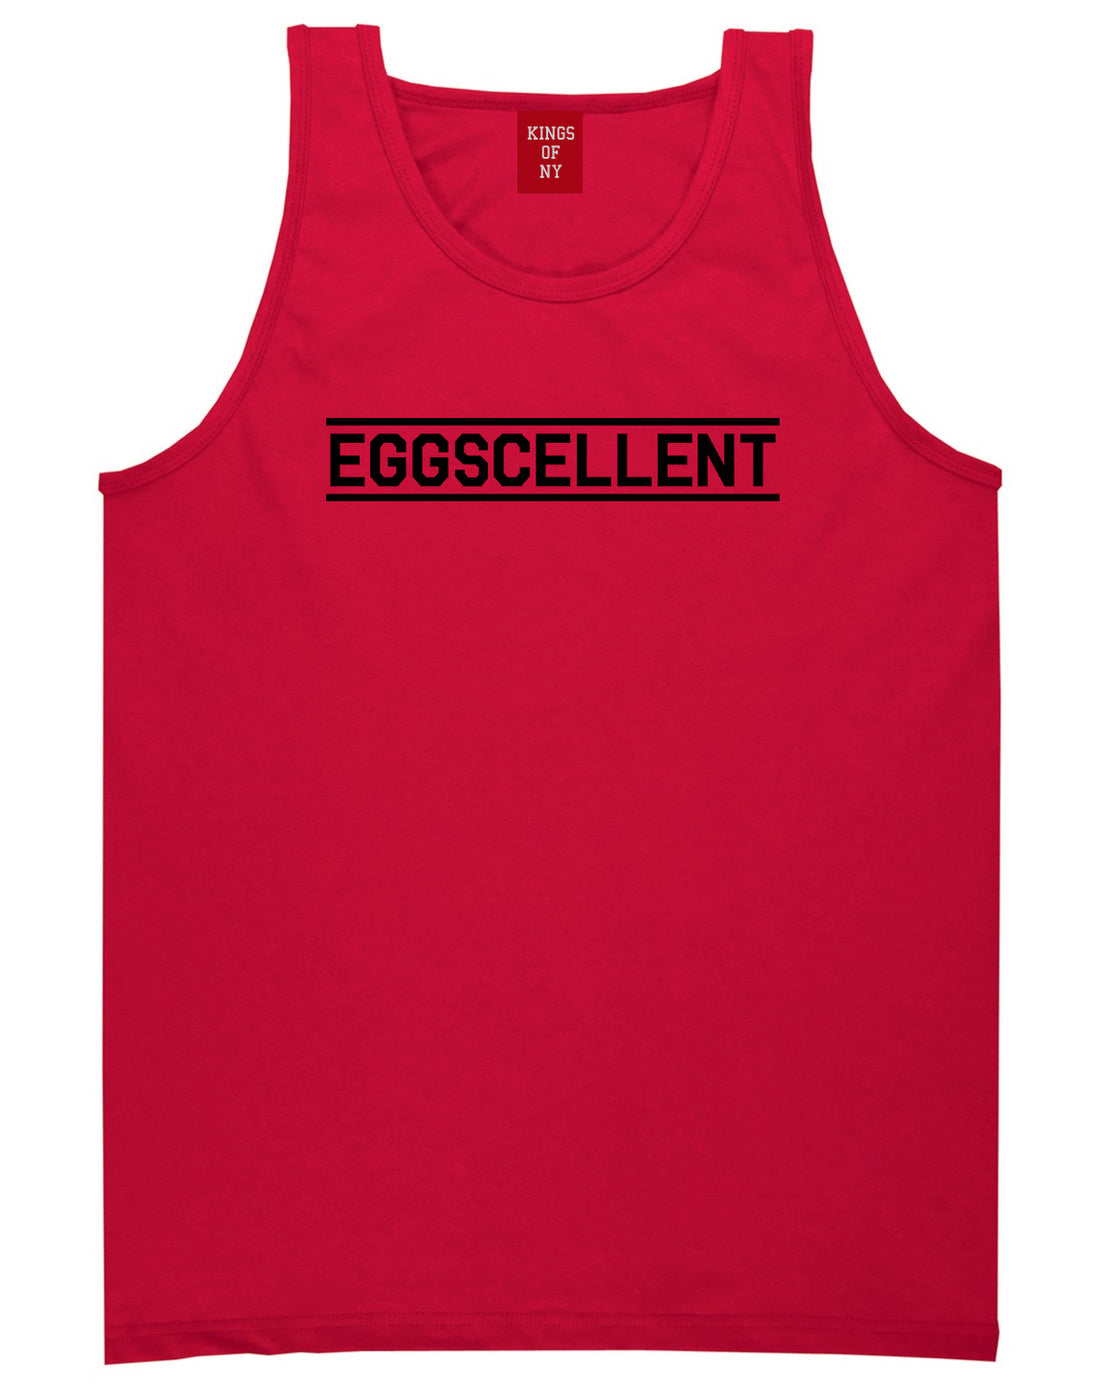 Eggscellent_Funny Mens Red Tank Top Shirt by Kings Of NY